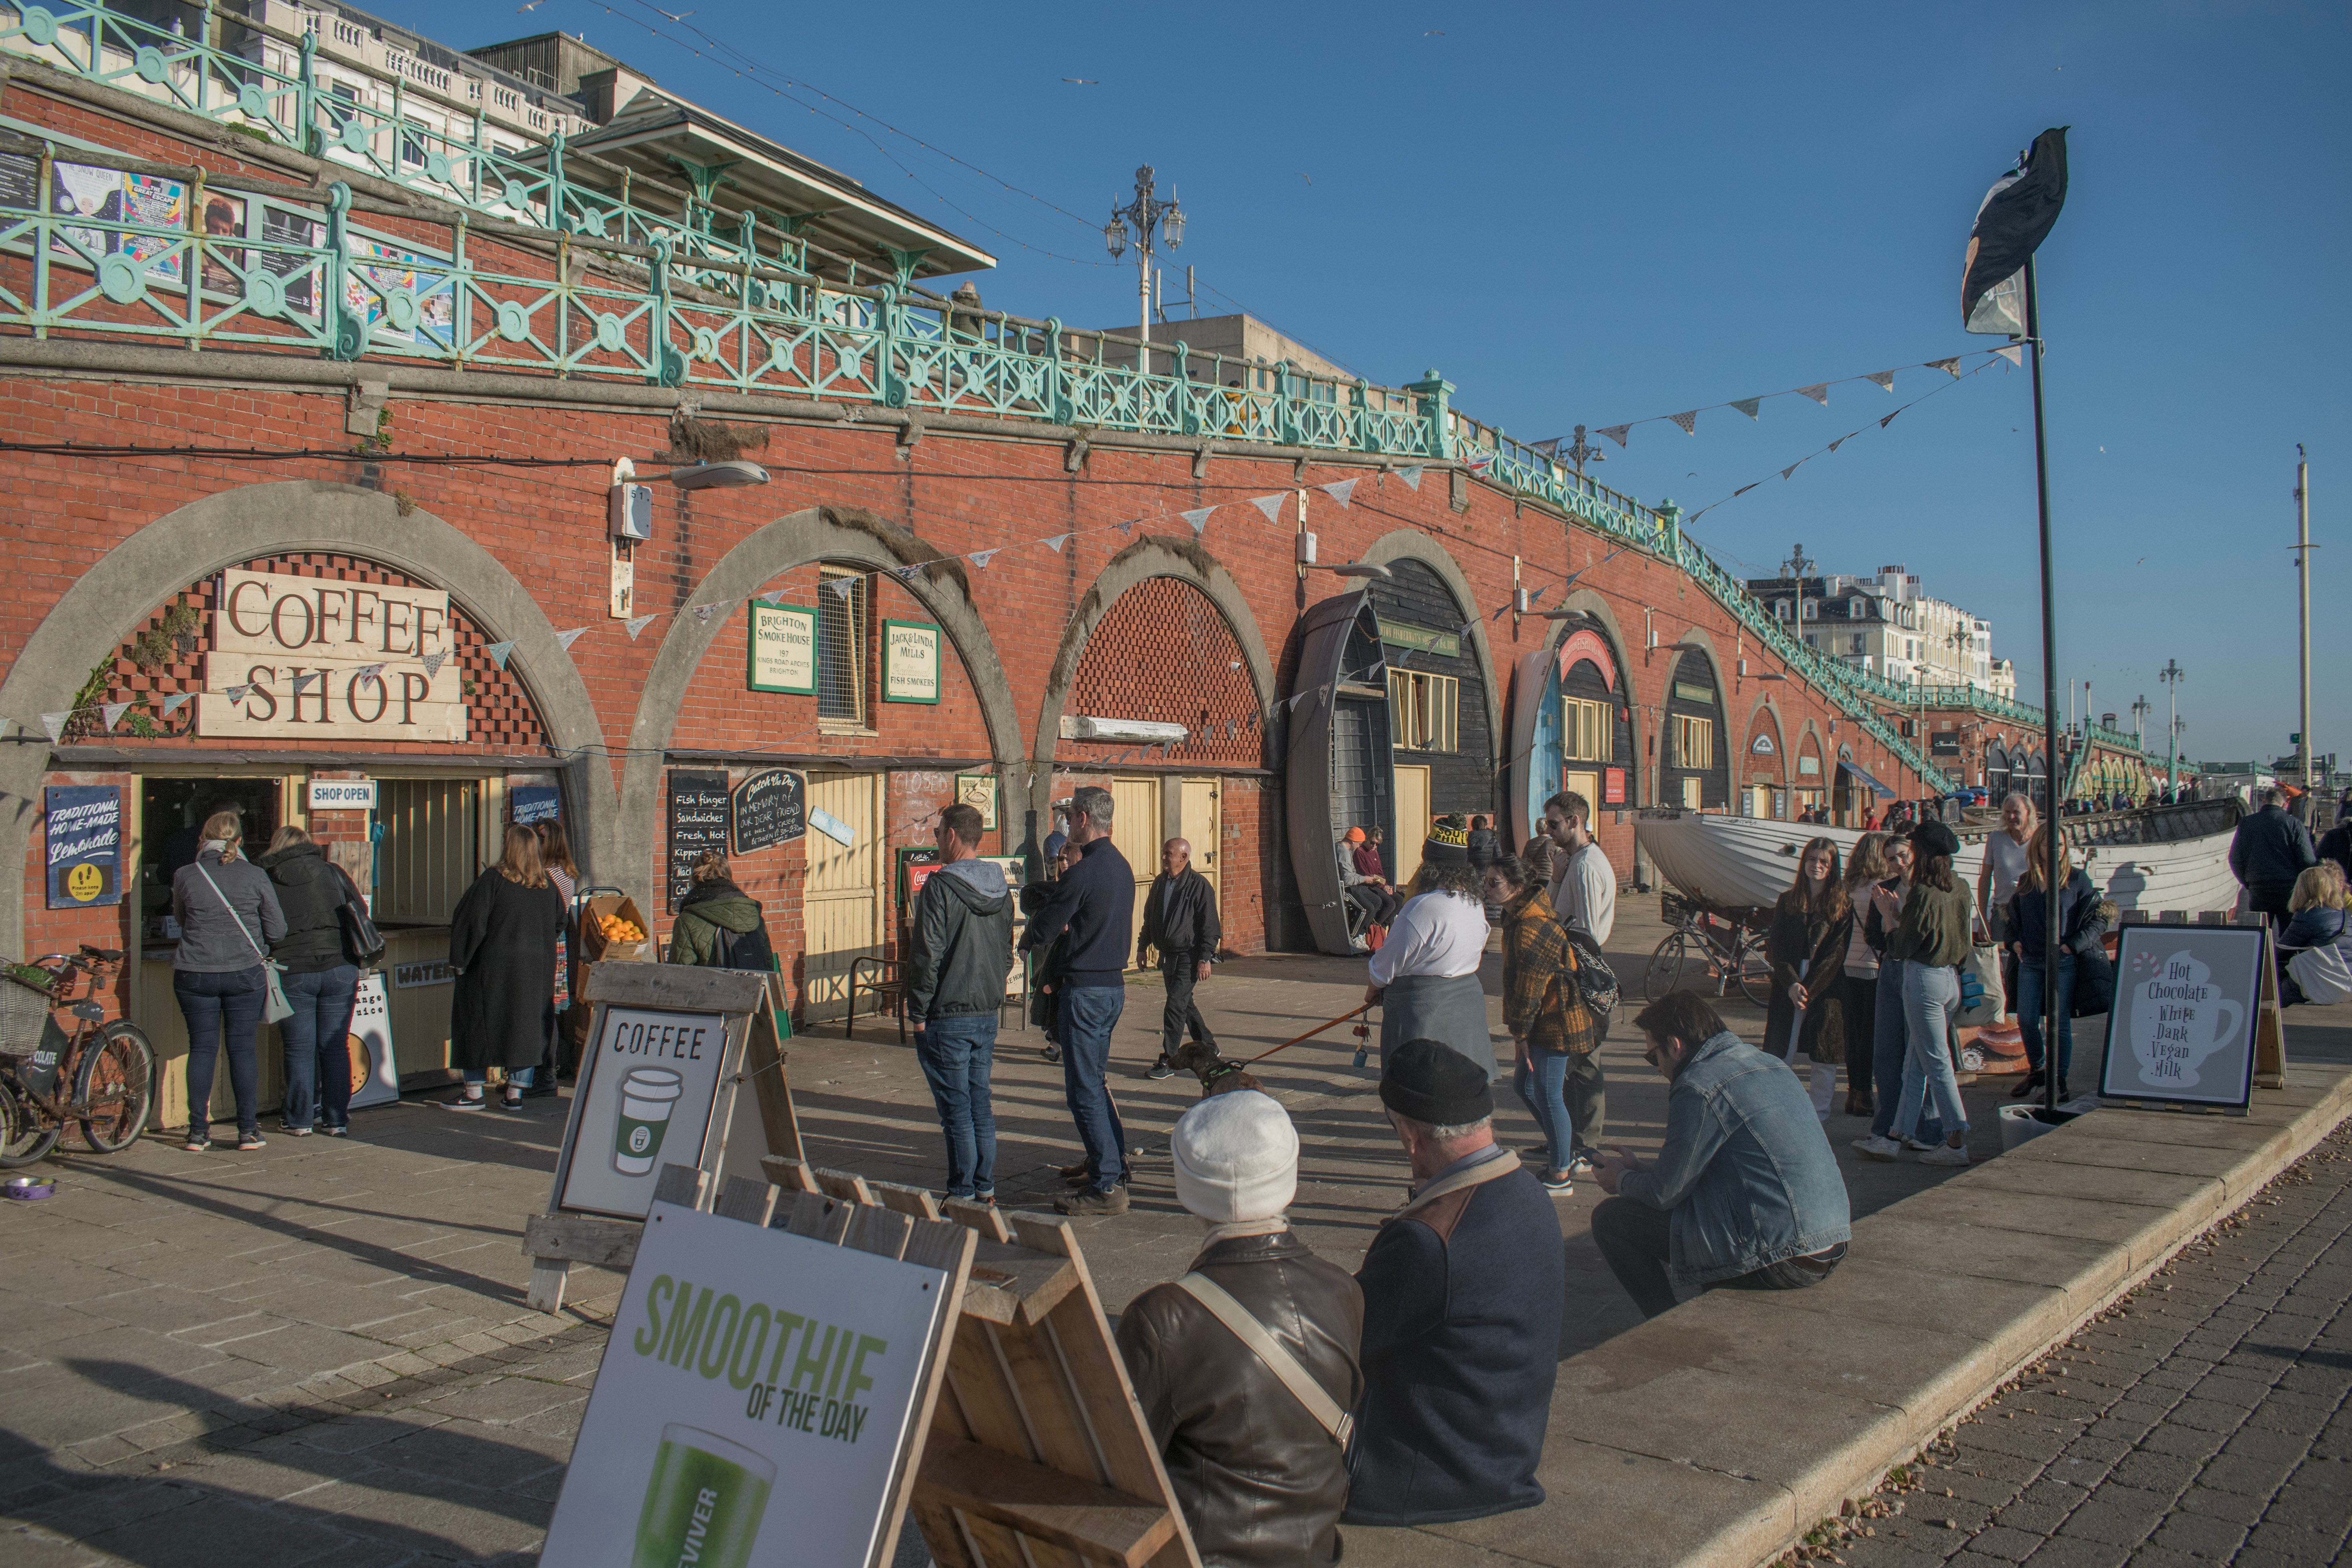 Brighton’s former fishing quarter has been busy this winter